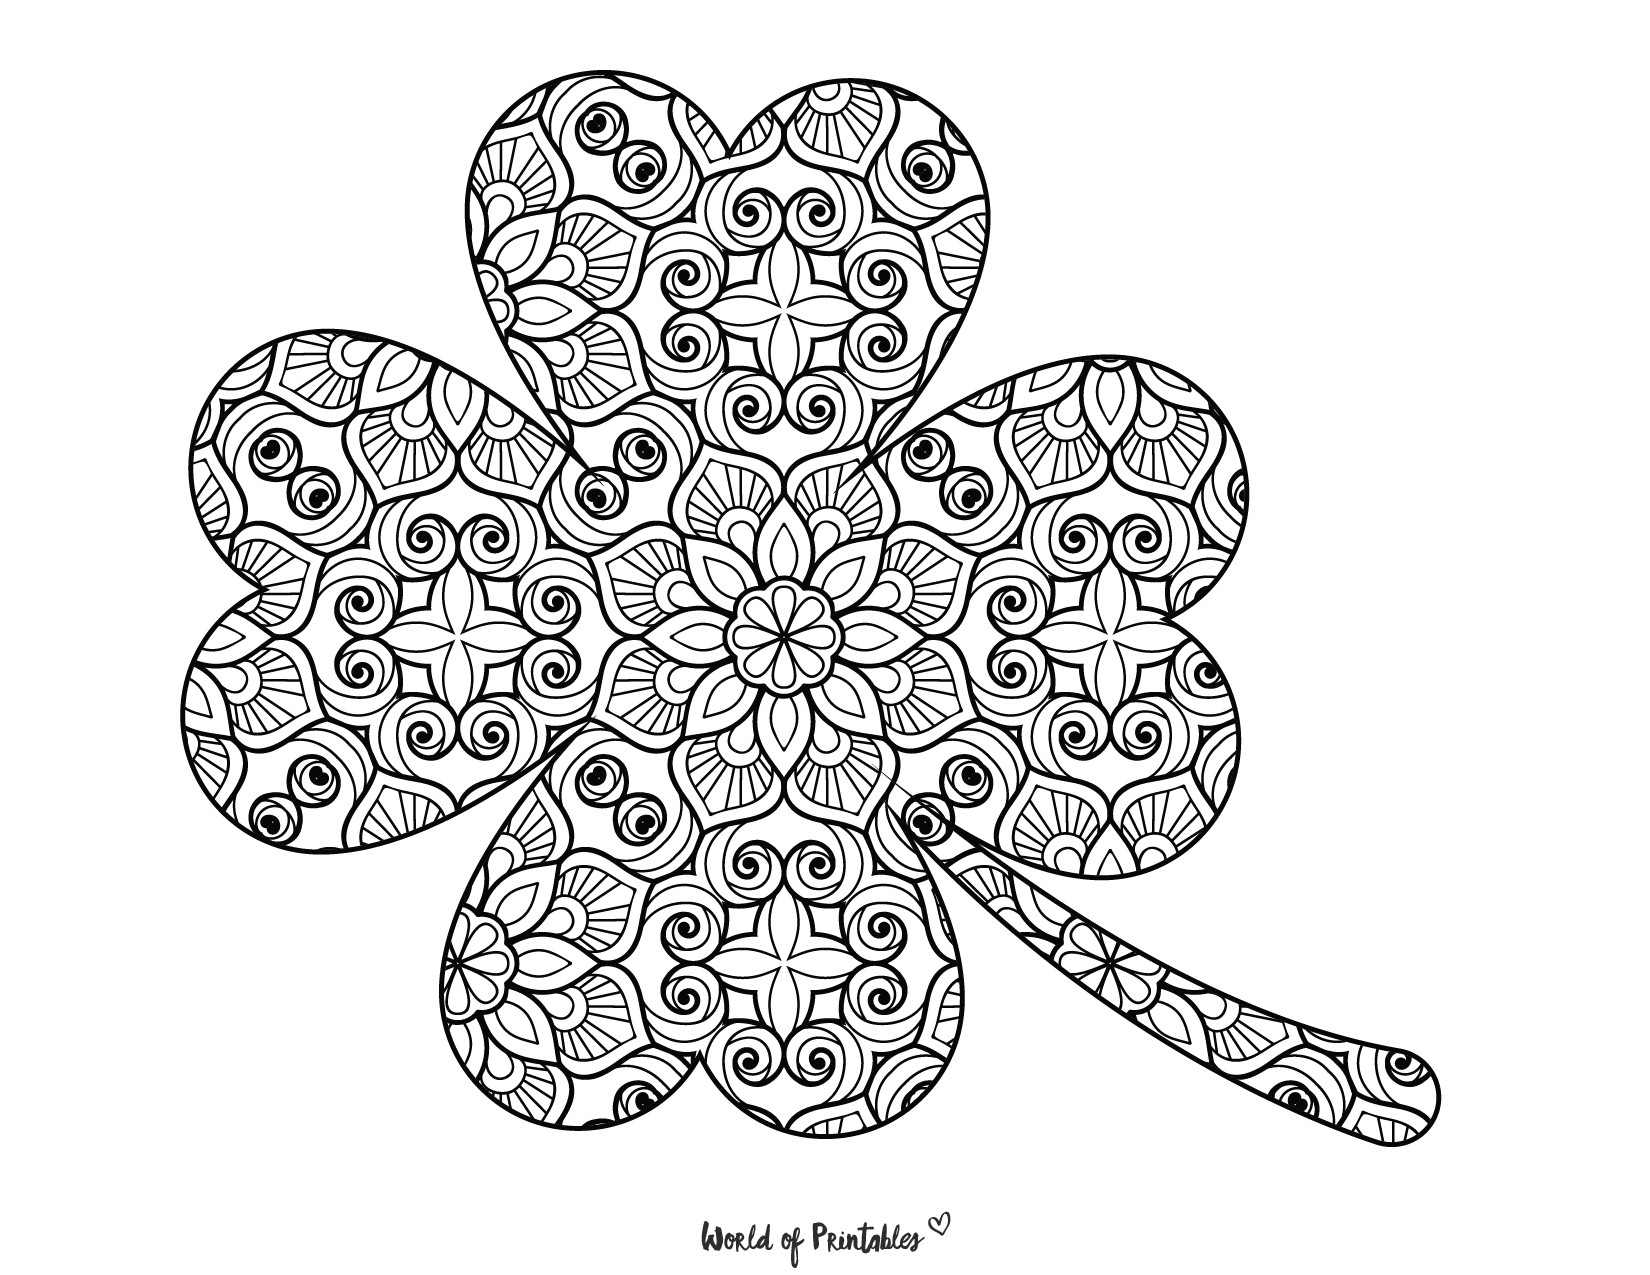 St patricks day coloring pages